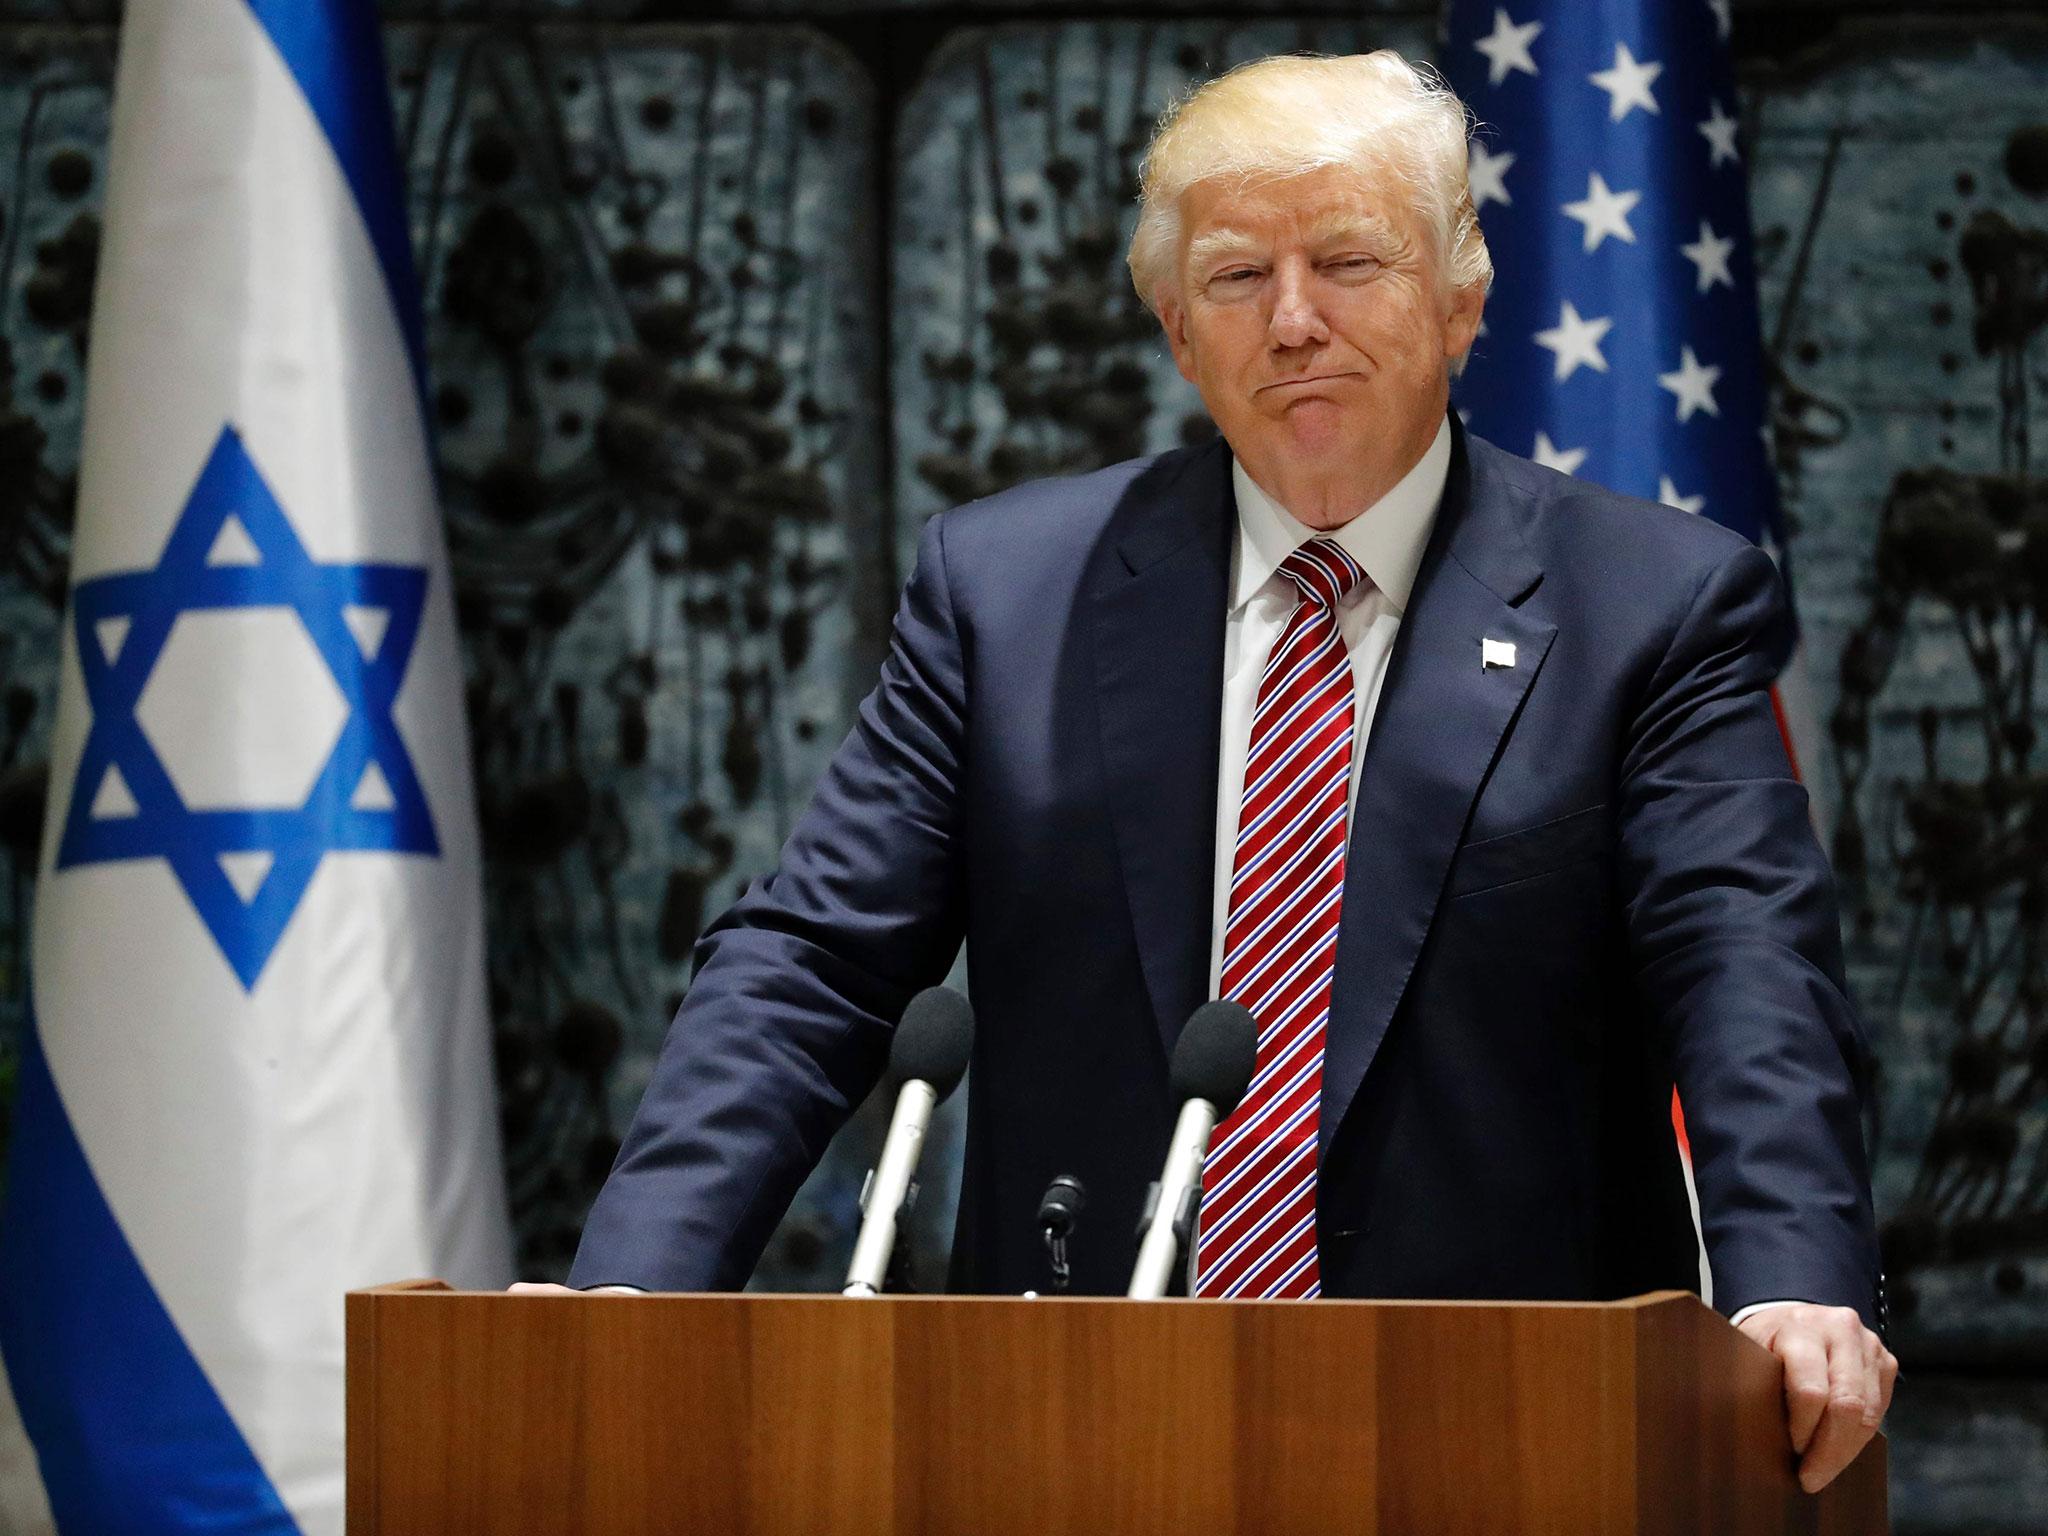 US President Donald Trump made the remarks during a press conference in Jerusalem with Israeli President Reuven Rivlin